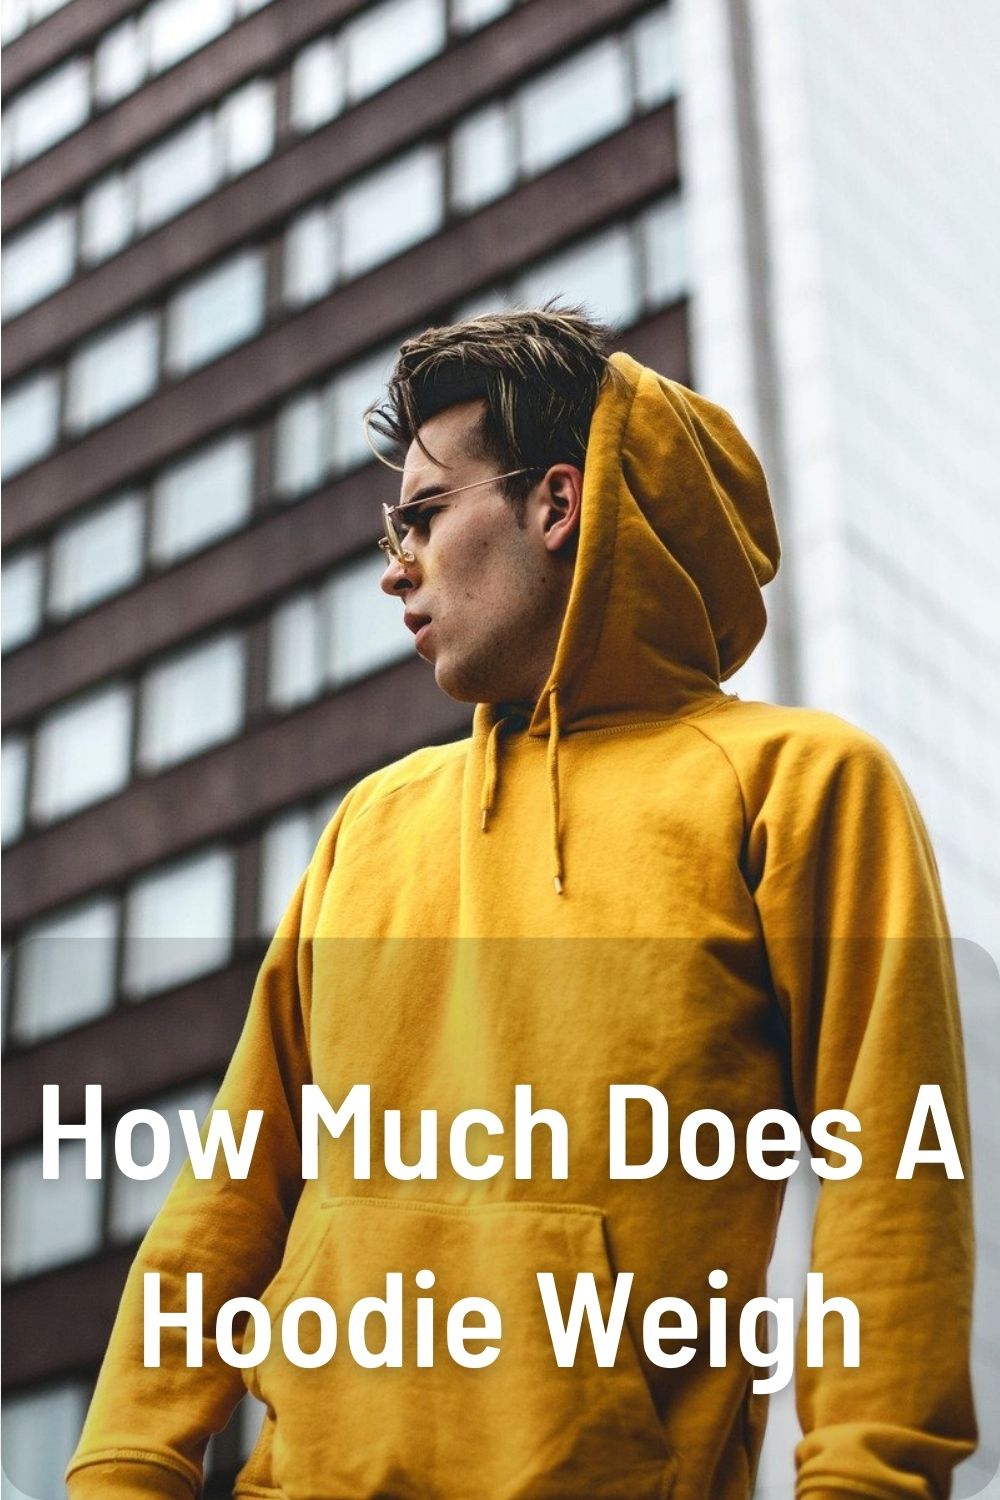 How Much Does A Hoodie Weigh